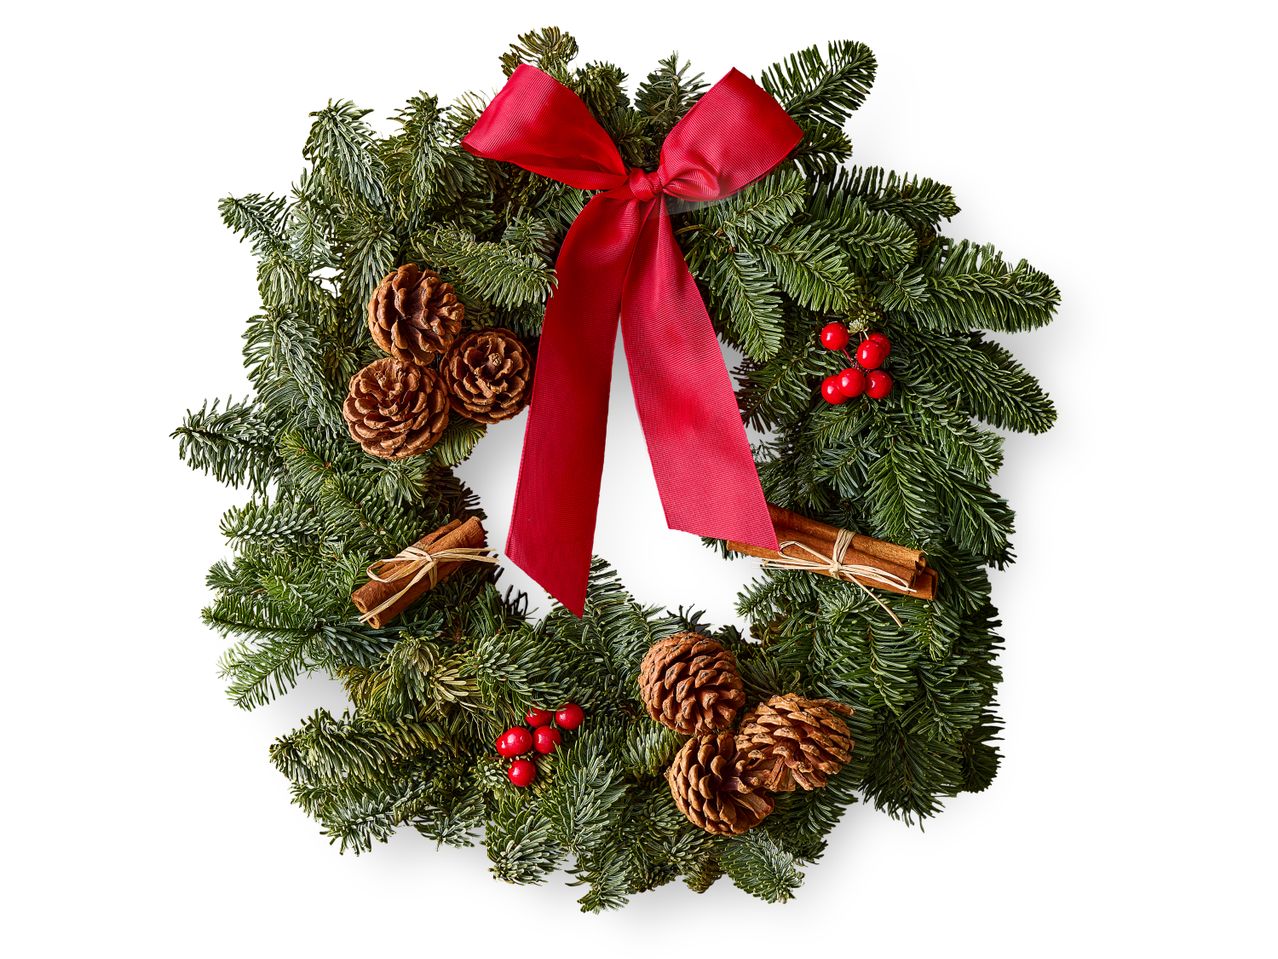 Go to full screen view: Deluxe British Large Christmas Wreath - Image 2